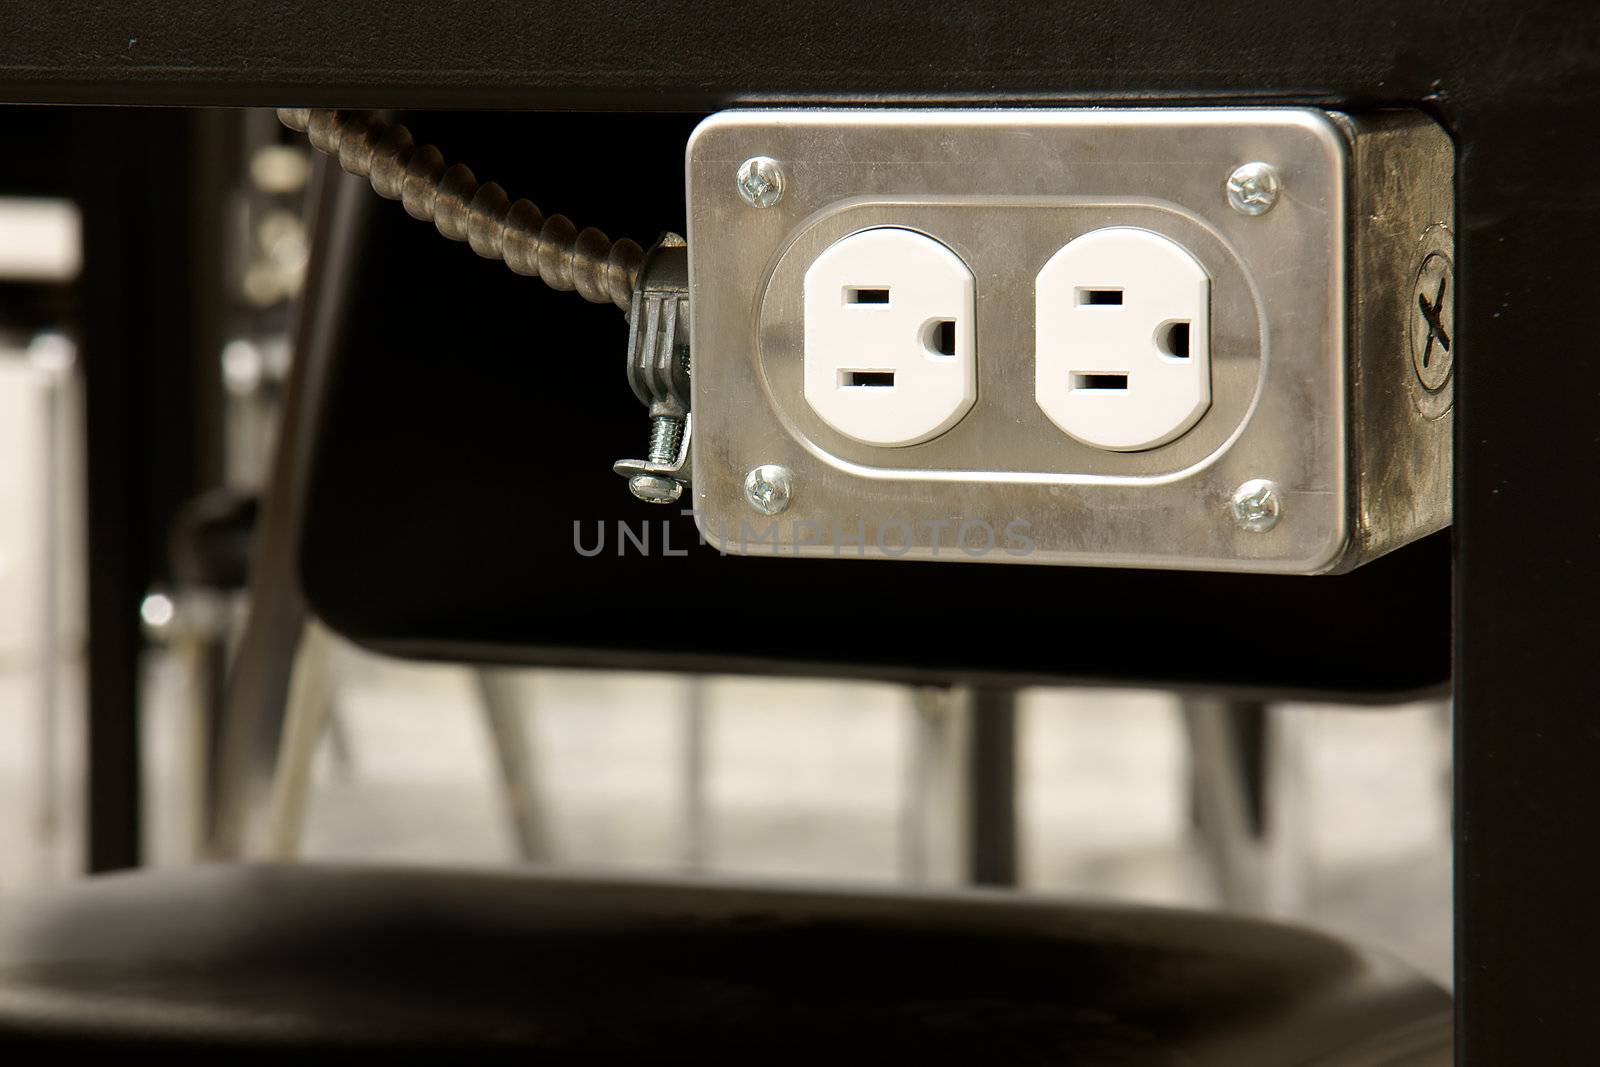 Close-up of an electrical outlet underneath student tabletop in school laboratory.